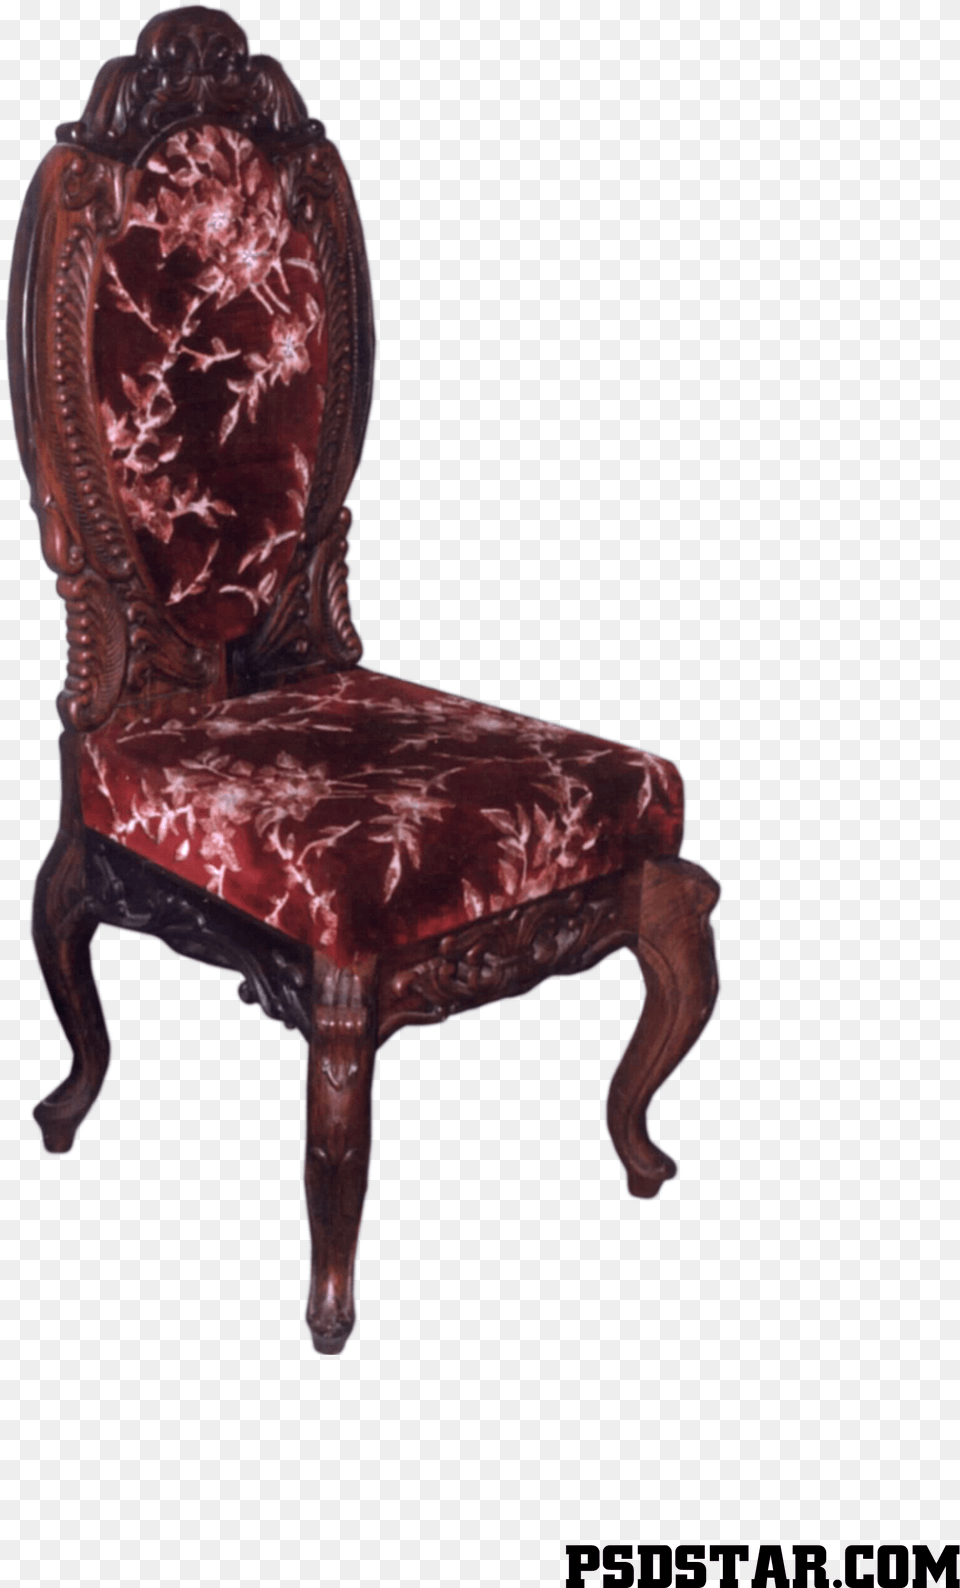 Chair Background Hd, Furniture, Armchair Png Image